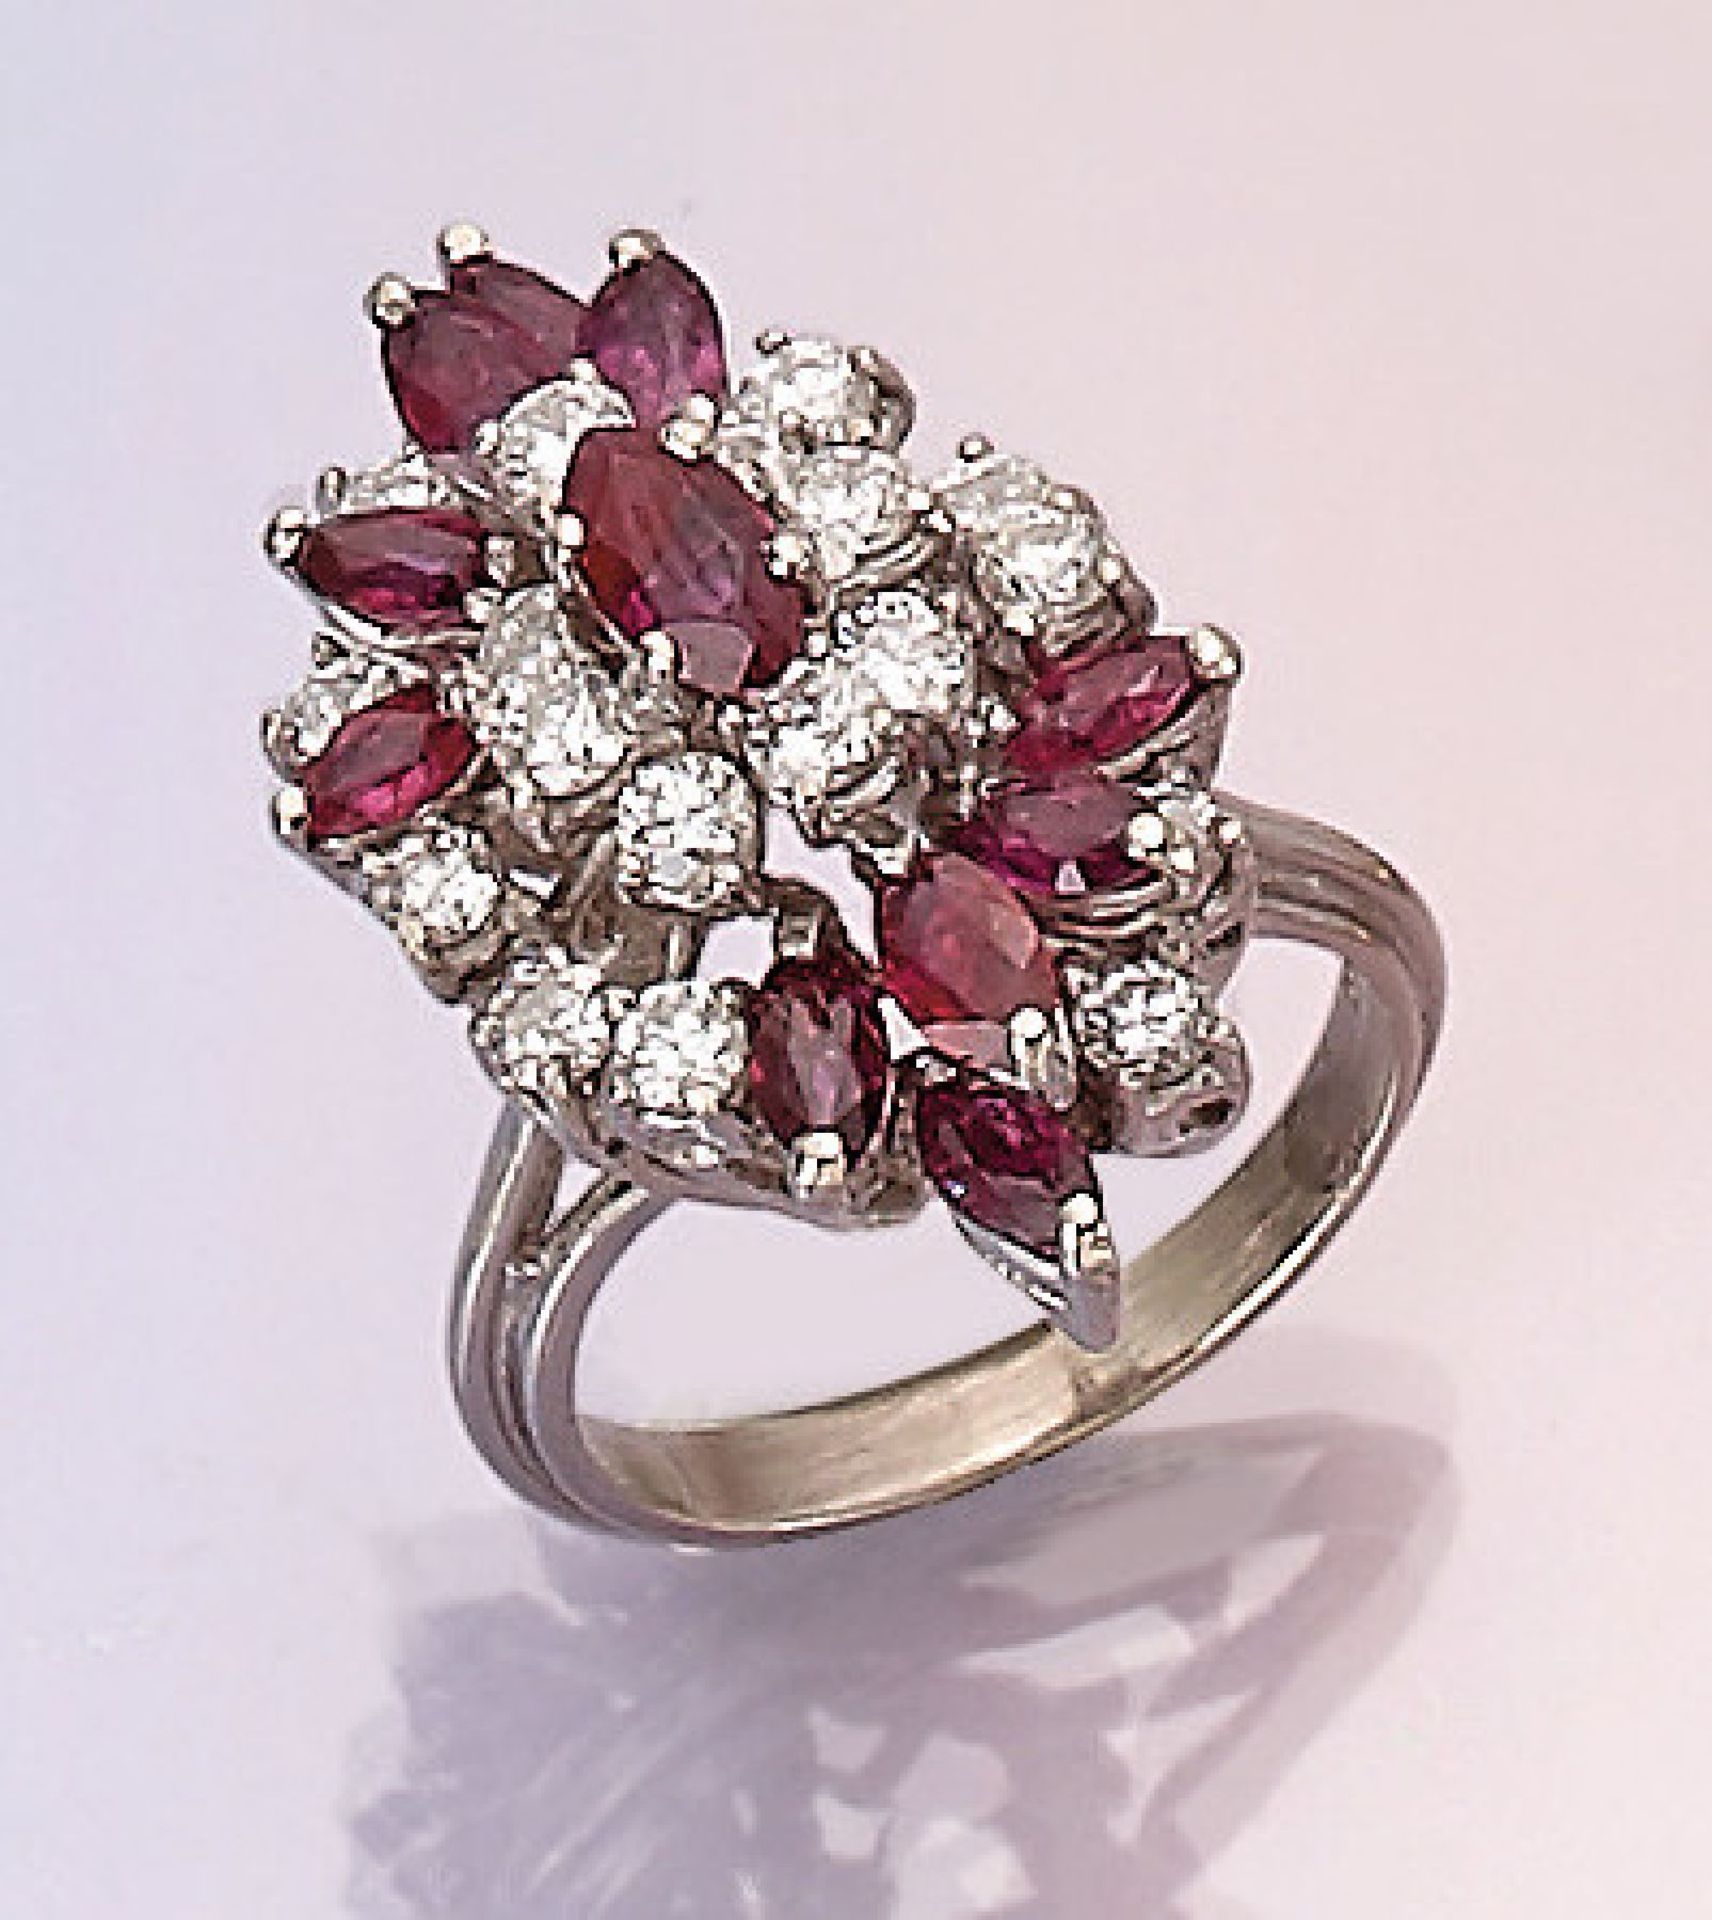 14 kt gold ring with rubies and brilliants ,WG 585/000, 11 ruby marquises total approx. 1.50 ct,